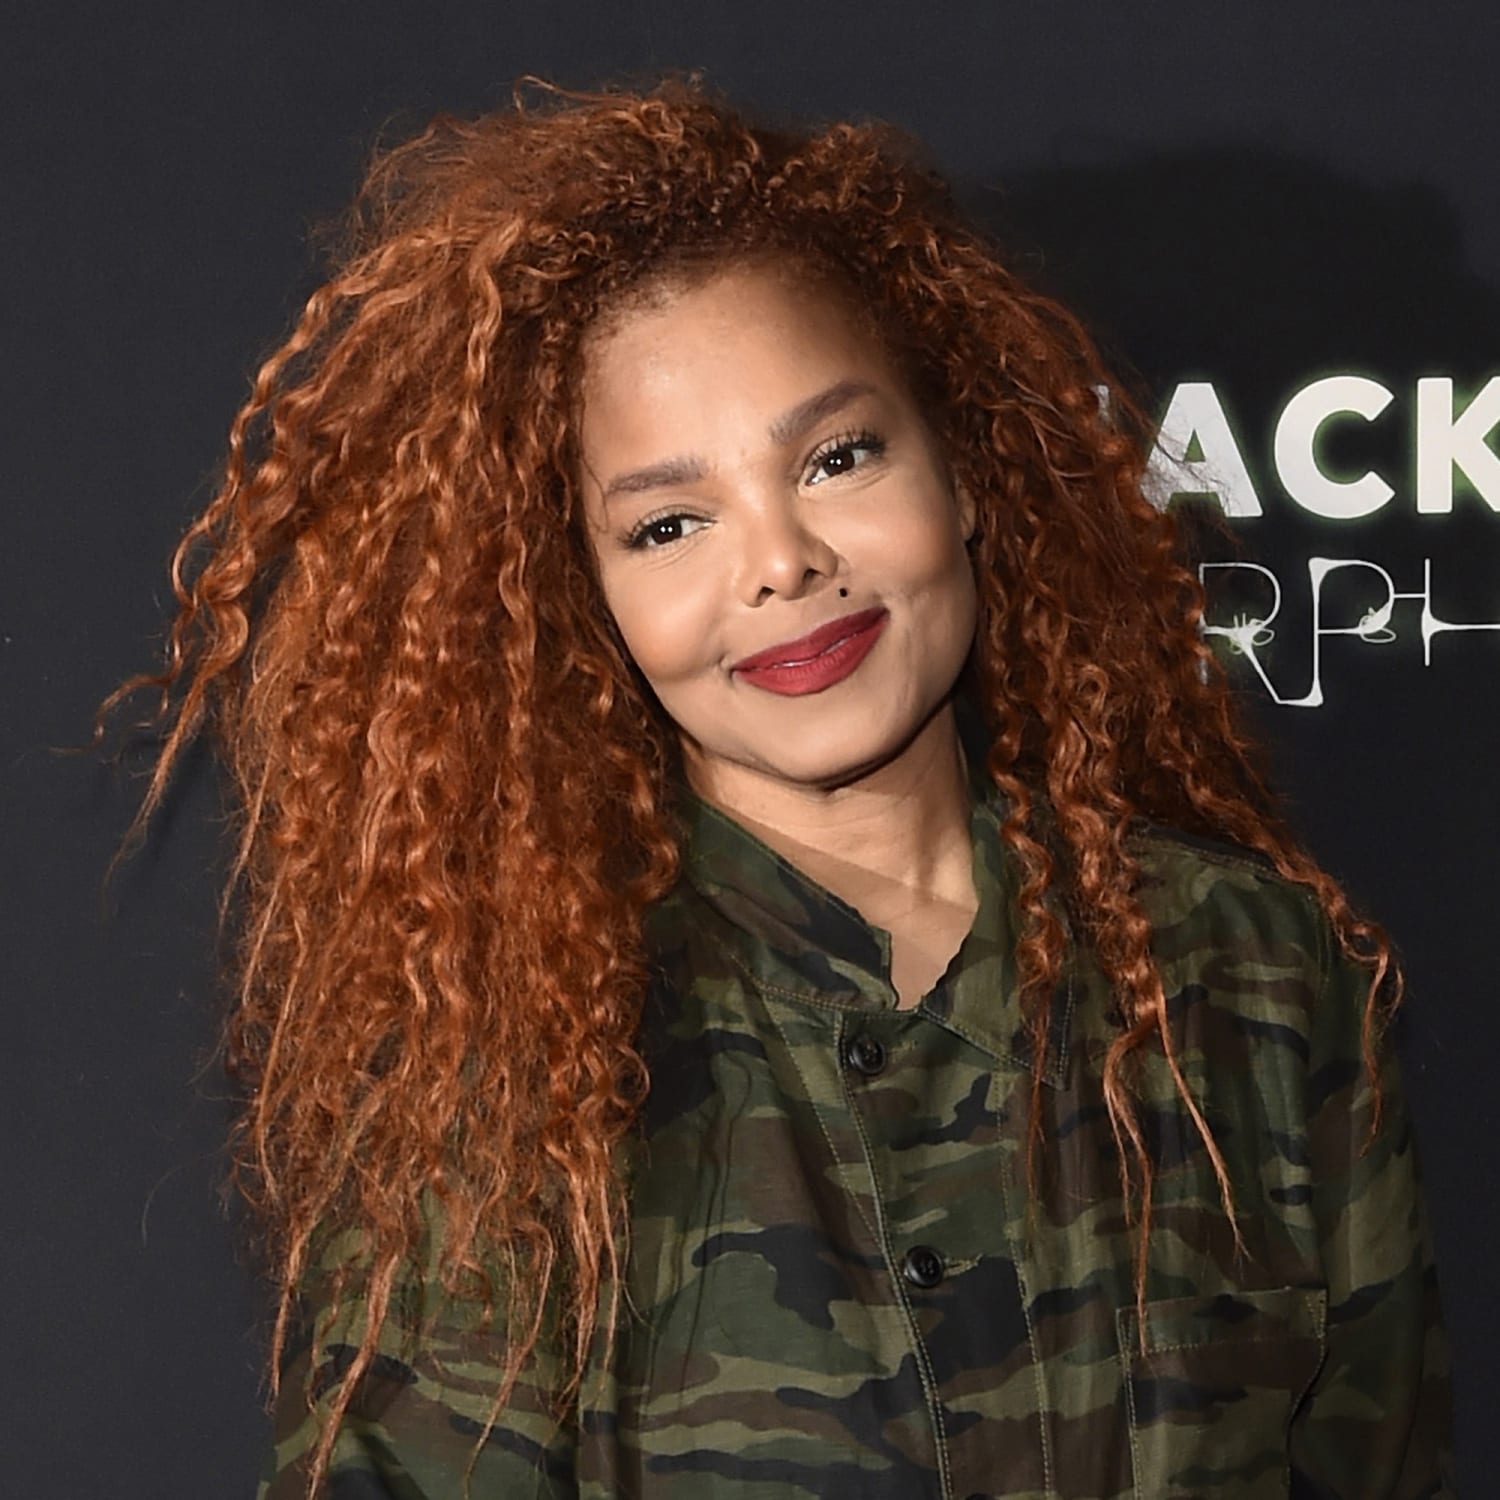 Janet Jackson brings back 'Rhythm Nation' look with newly dyed